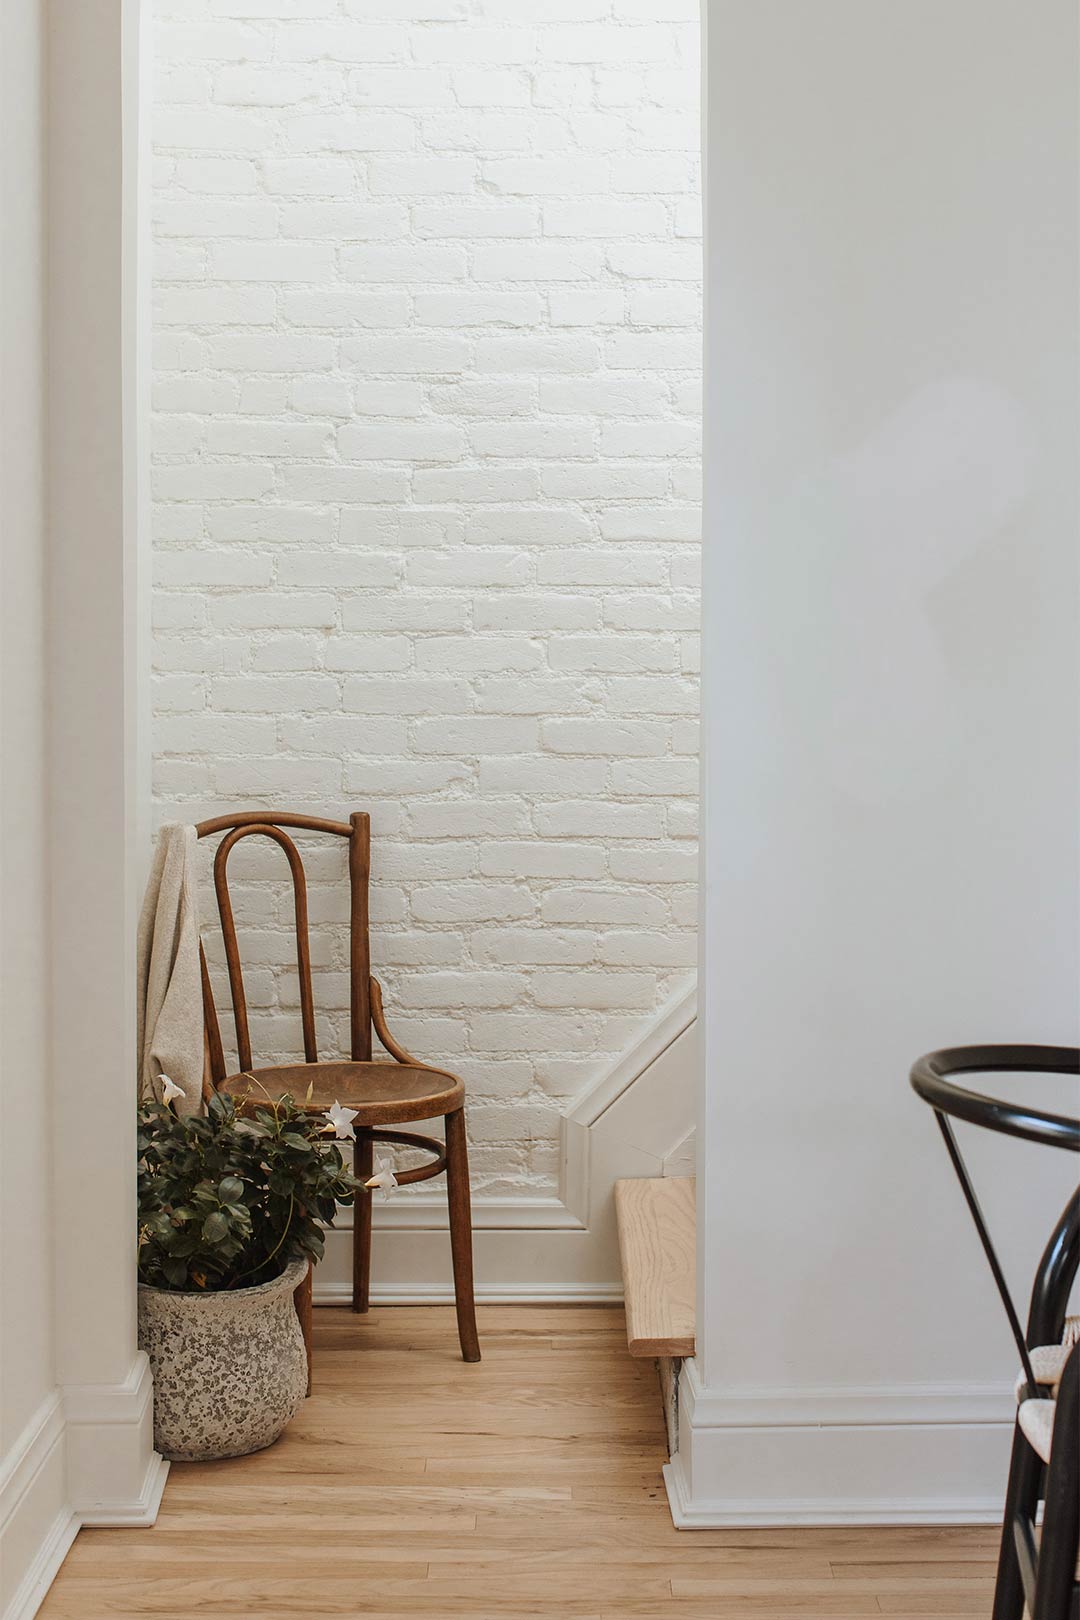 A peek into the upstairs with painted brick and white oak flooring